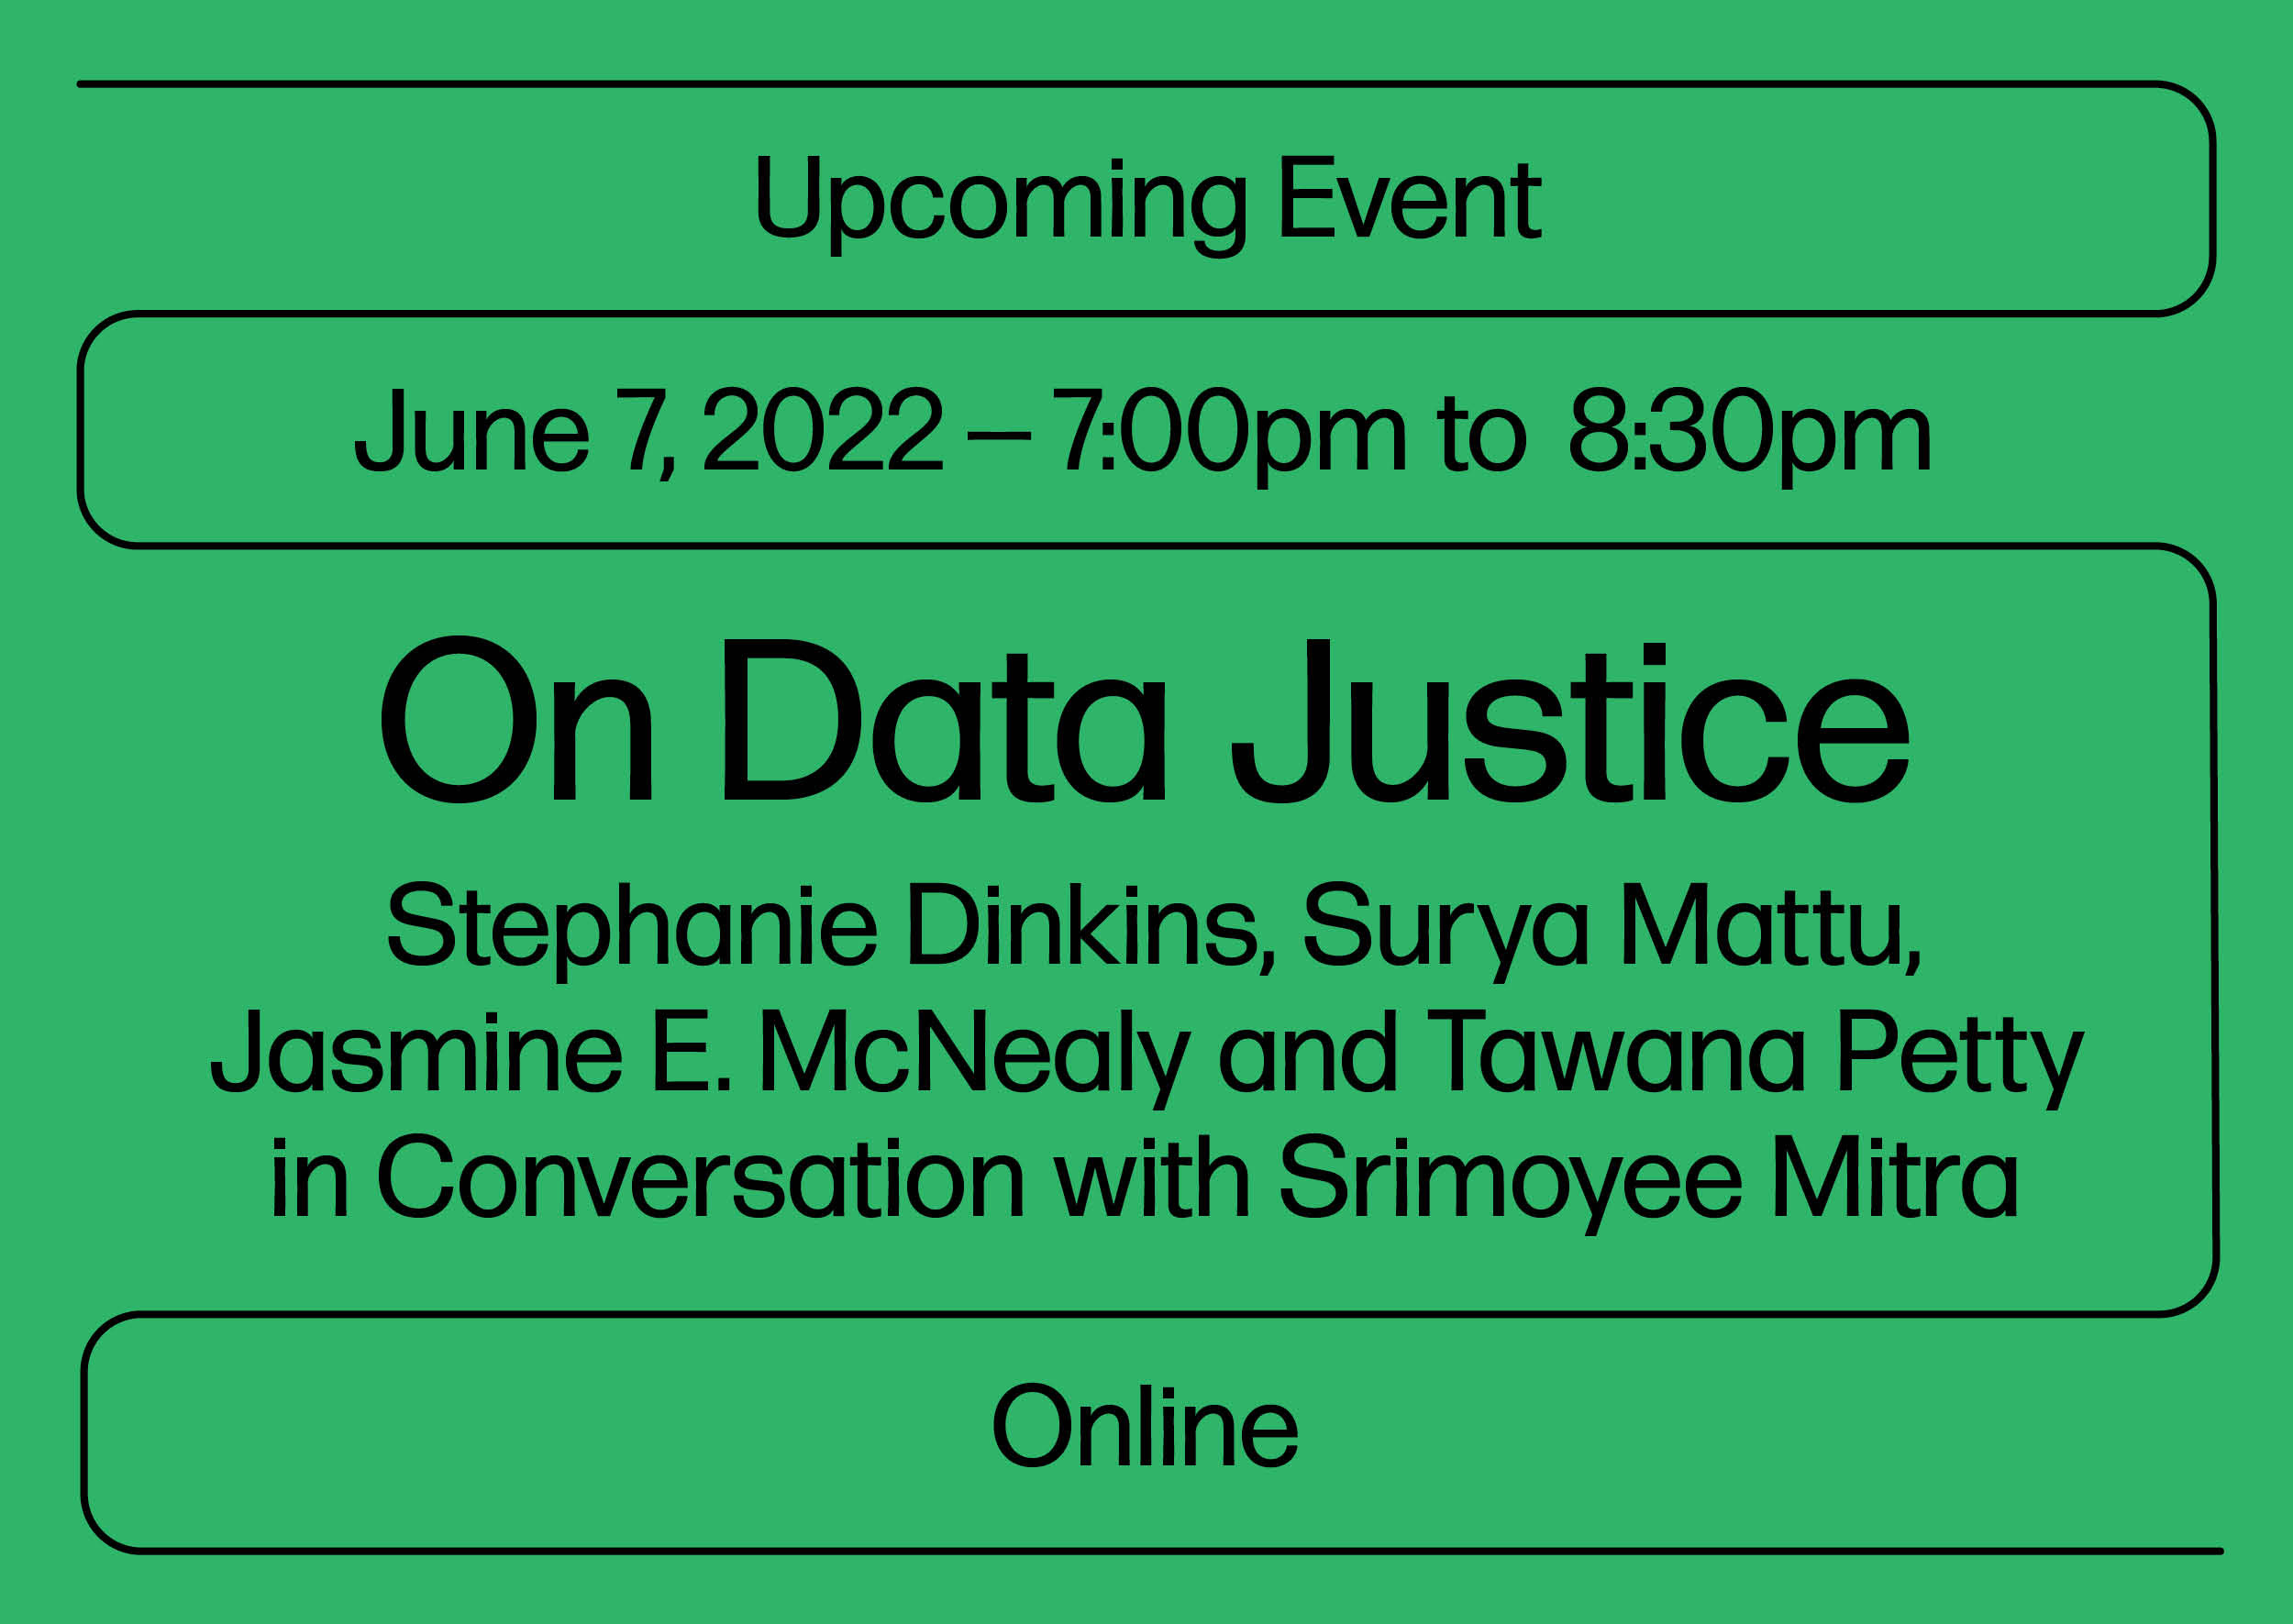 Black text on green background that reads "Upcoming Event, June 7, 2022 , 7:00pm to 8:30pm, On Data Justice, Stephanie Dinkins, Surya Mattu, Jasmine E. McNealy and Tawana Petty in Conversation with Srimoyee Mitra, Online"